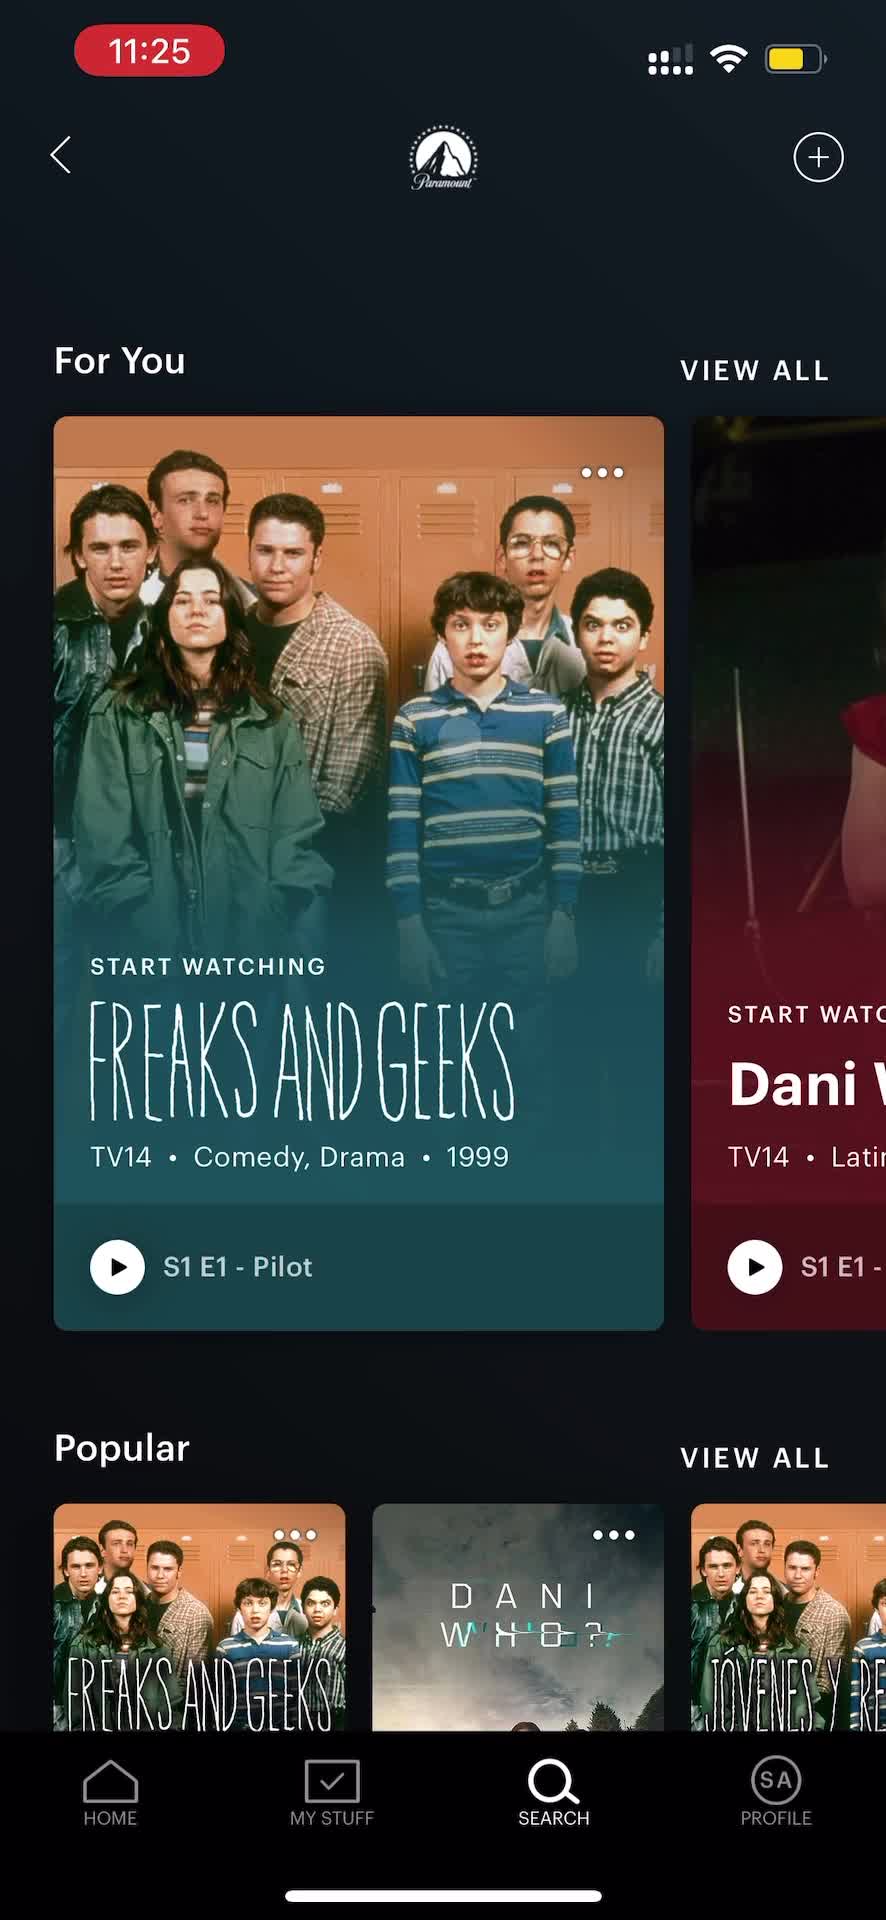 Screenshot of Category on Searching on Hulu user flow